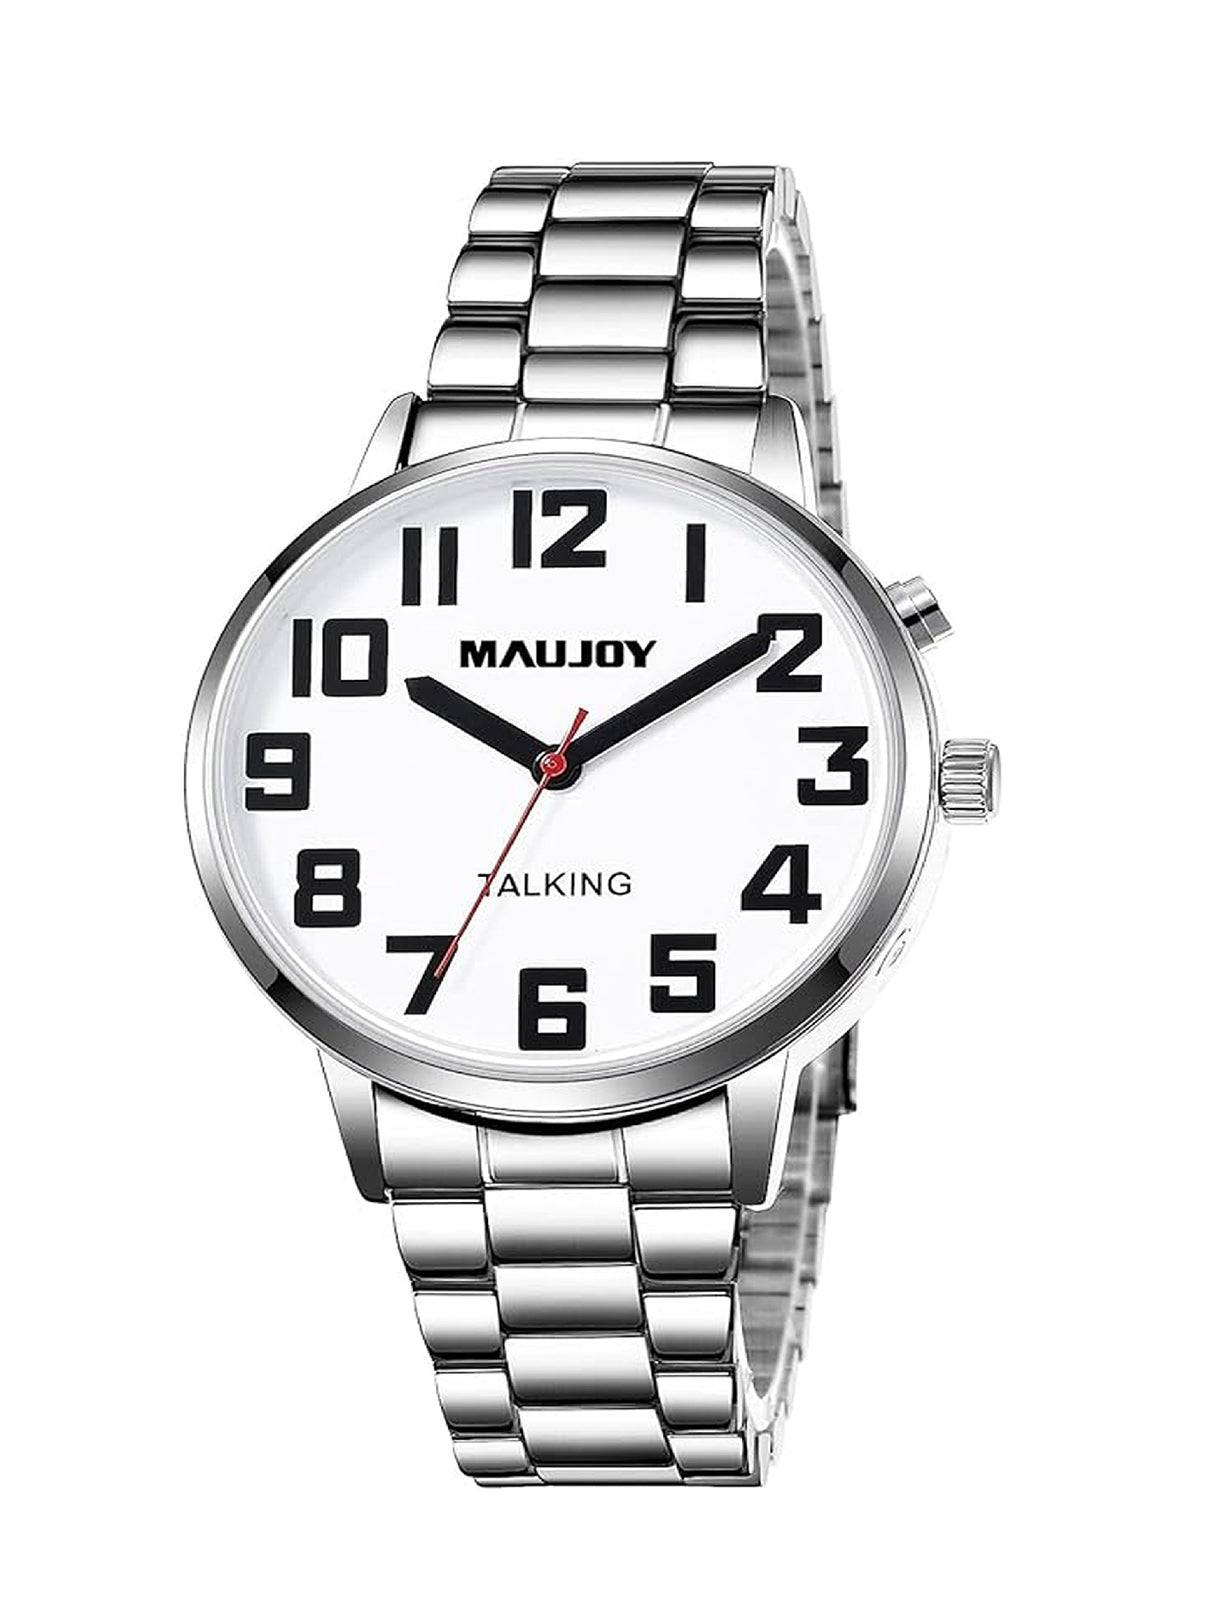 Image for French Men'S Talking Watch